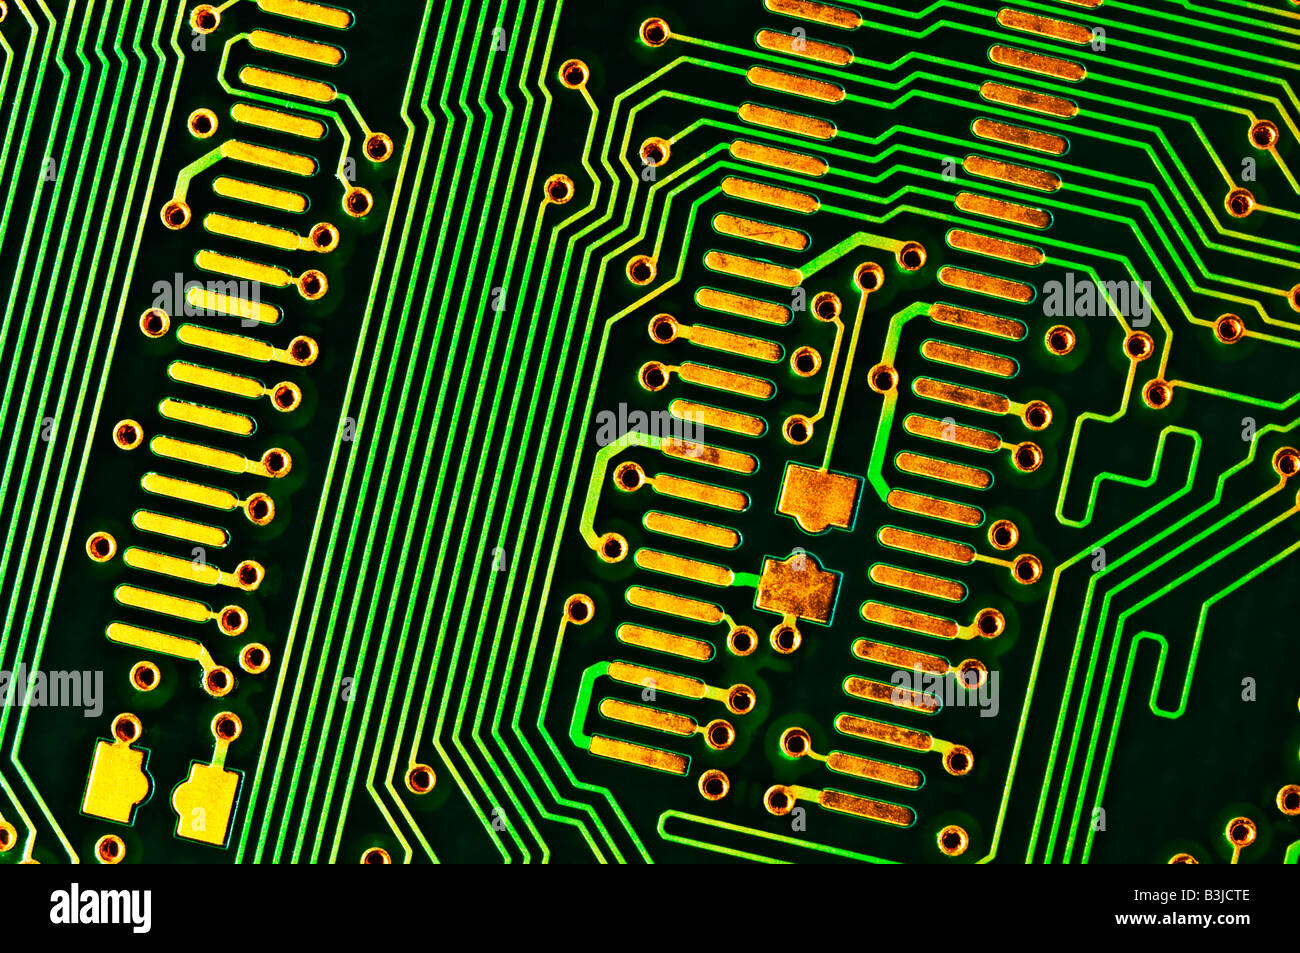 Printed Circuit Board (from computer memory card) Stock Photo